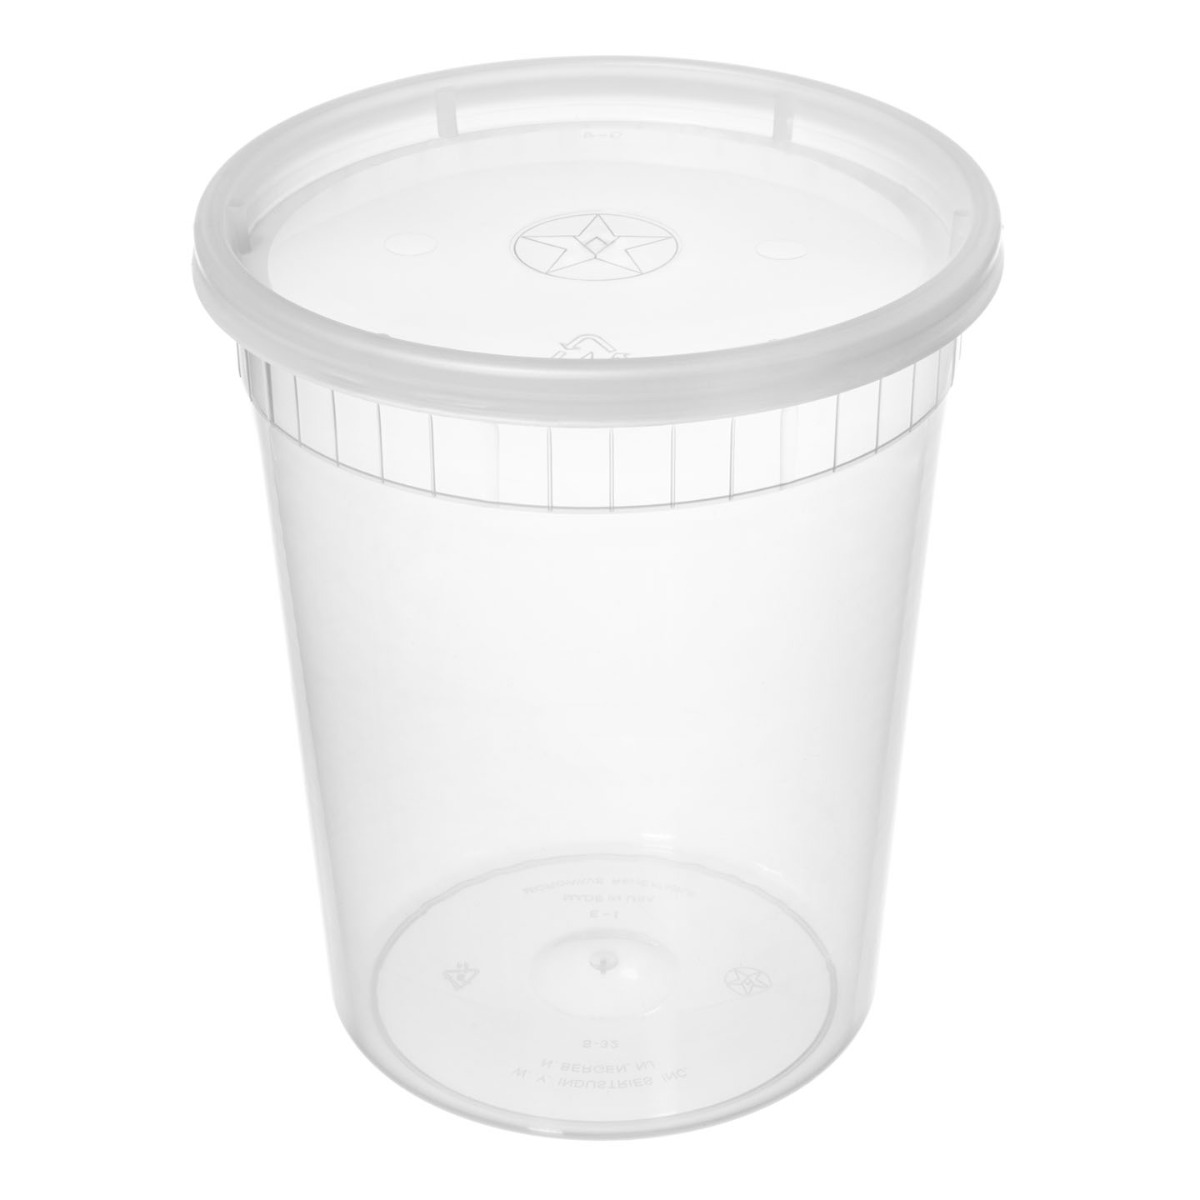 Yw COMINHKR02572325 Sets 32oz Plastic soup/Food Container with Lids